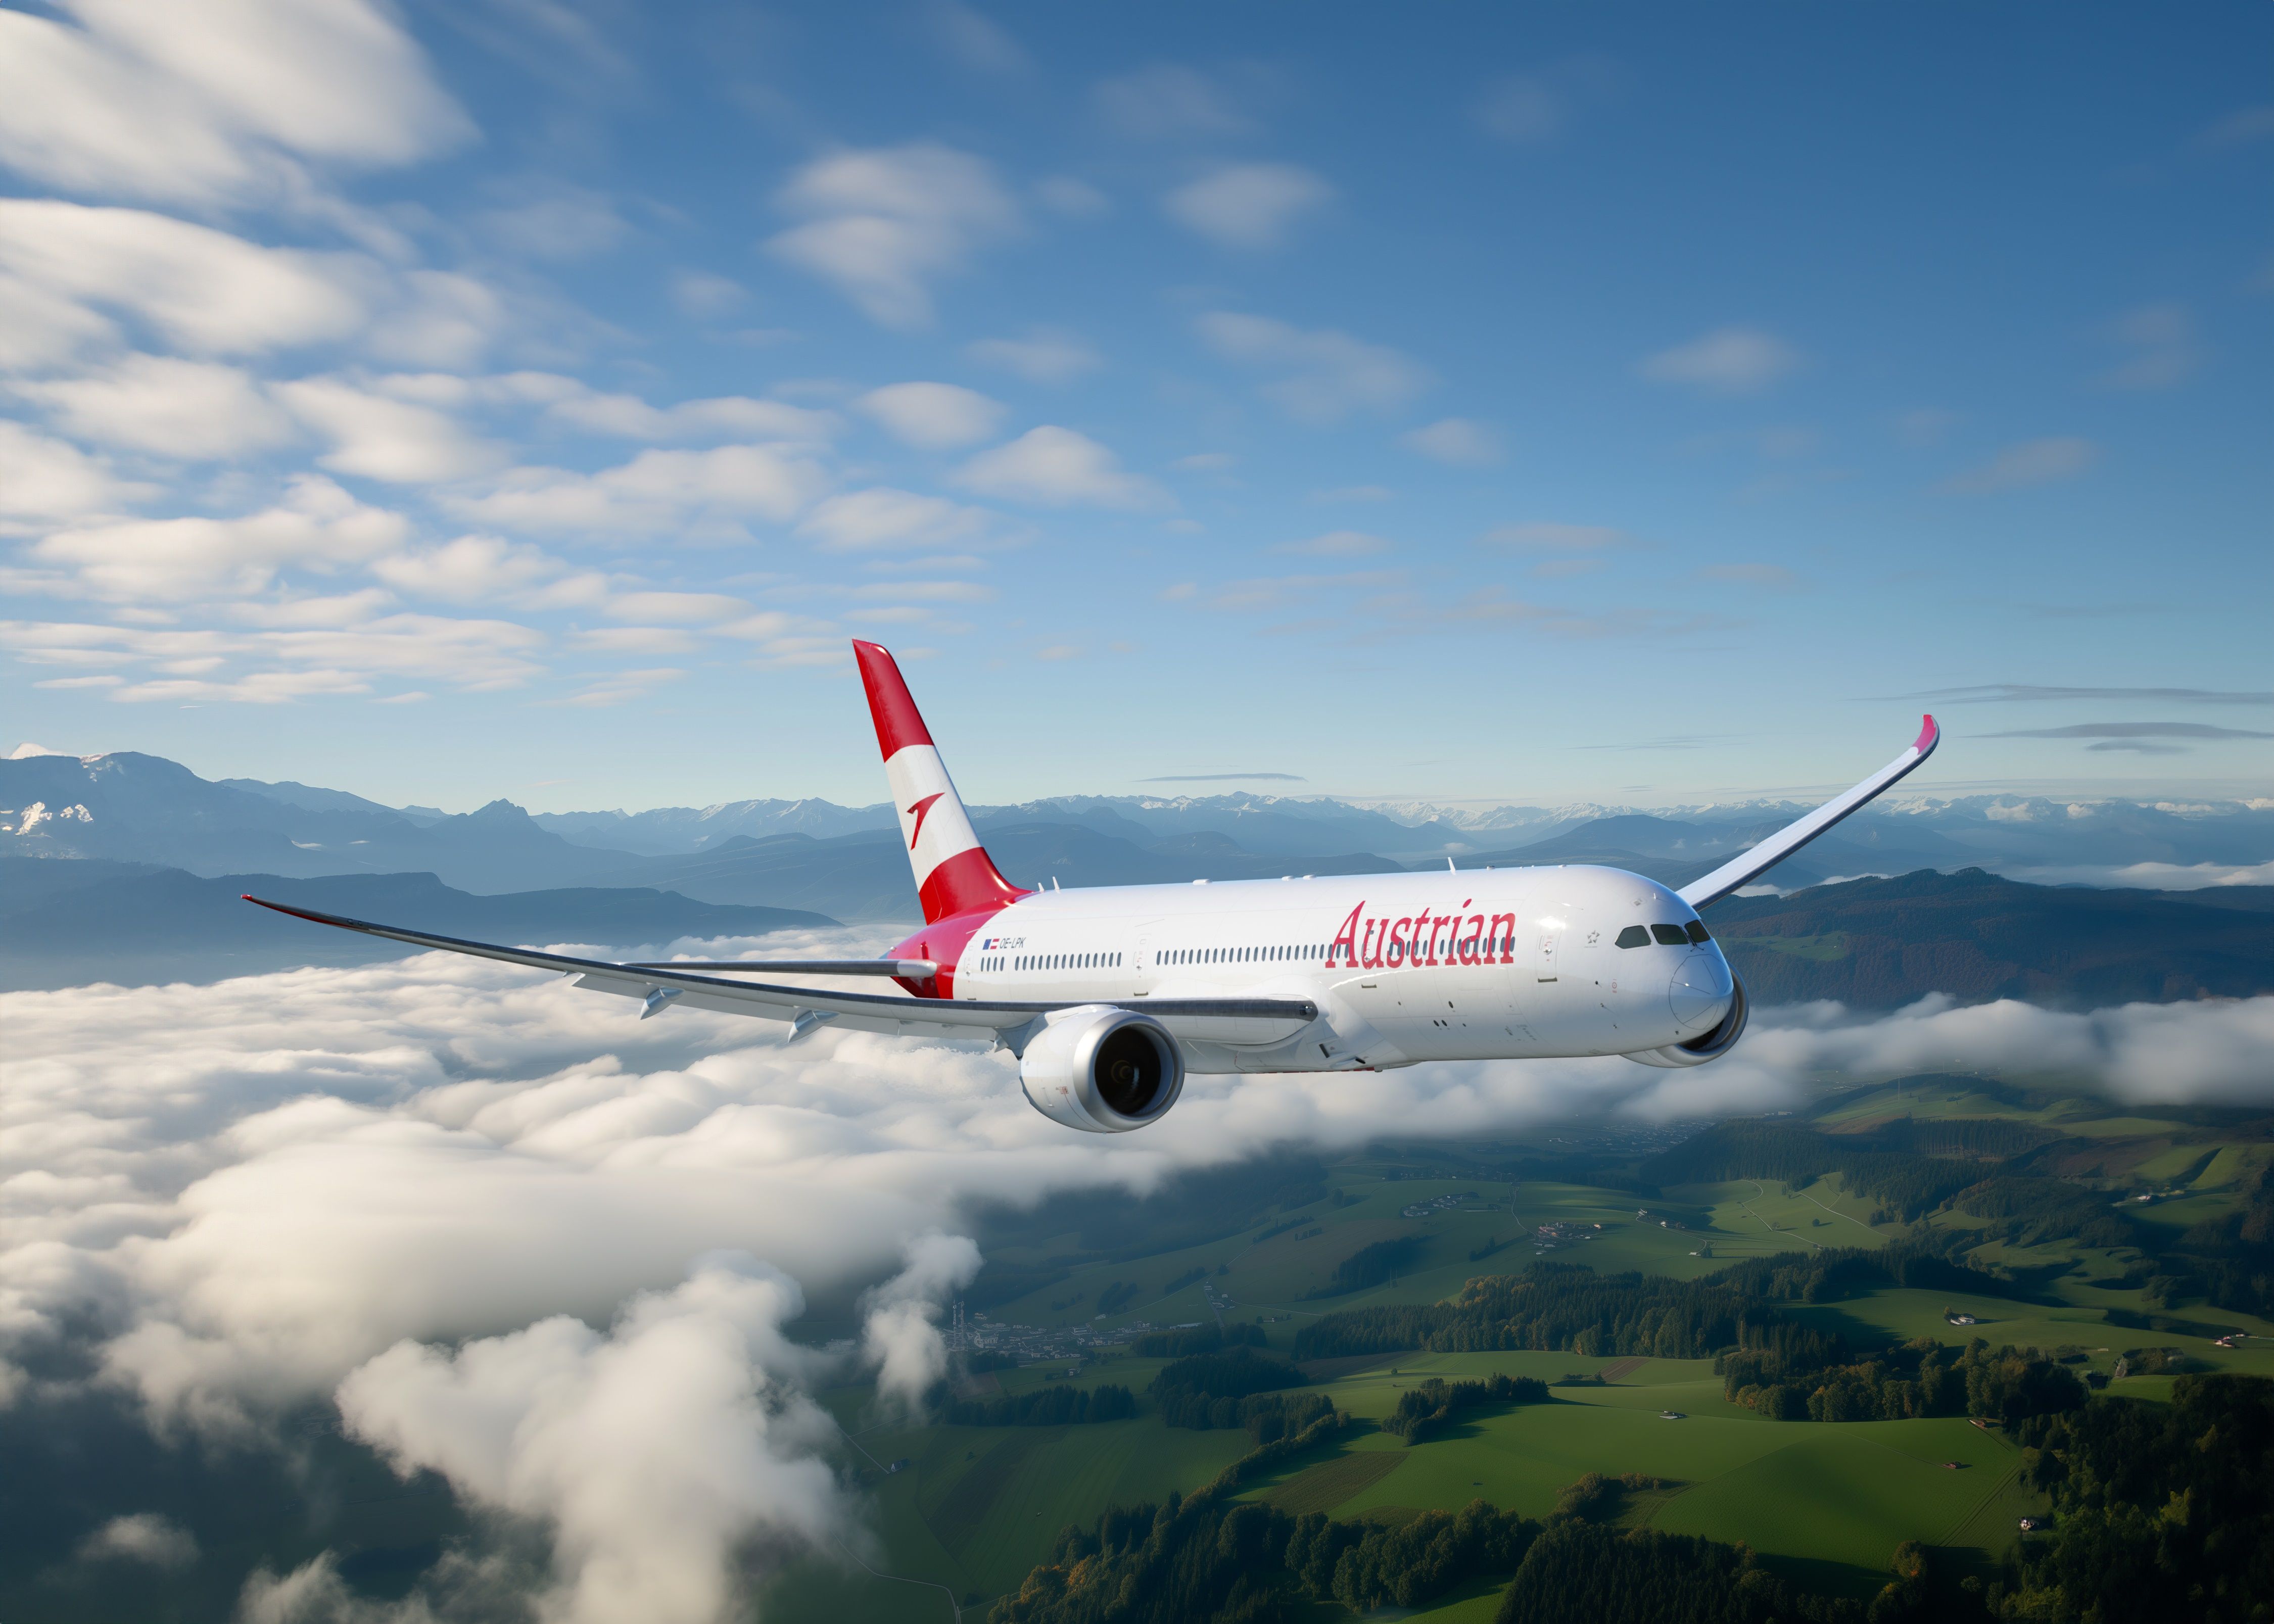 Rendering of the Austrian 787 flying in the sky